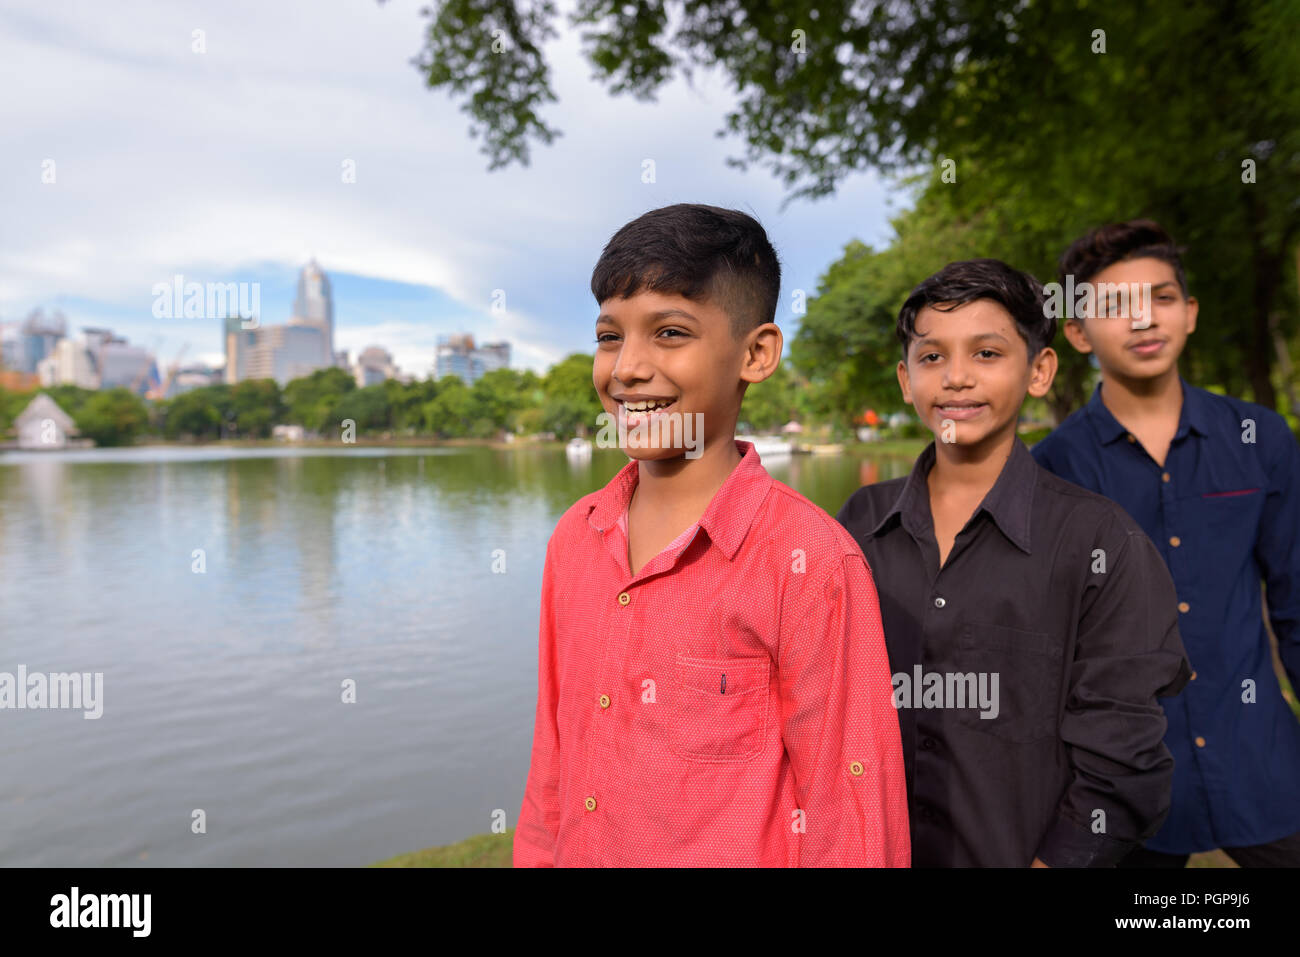 Portrait of Indian family relaxing together at the park Banque D'Images